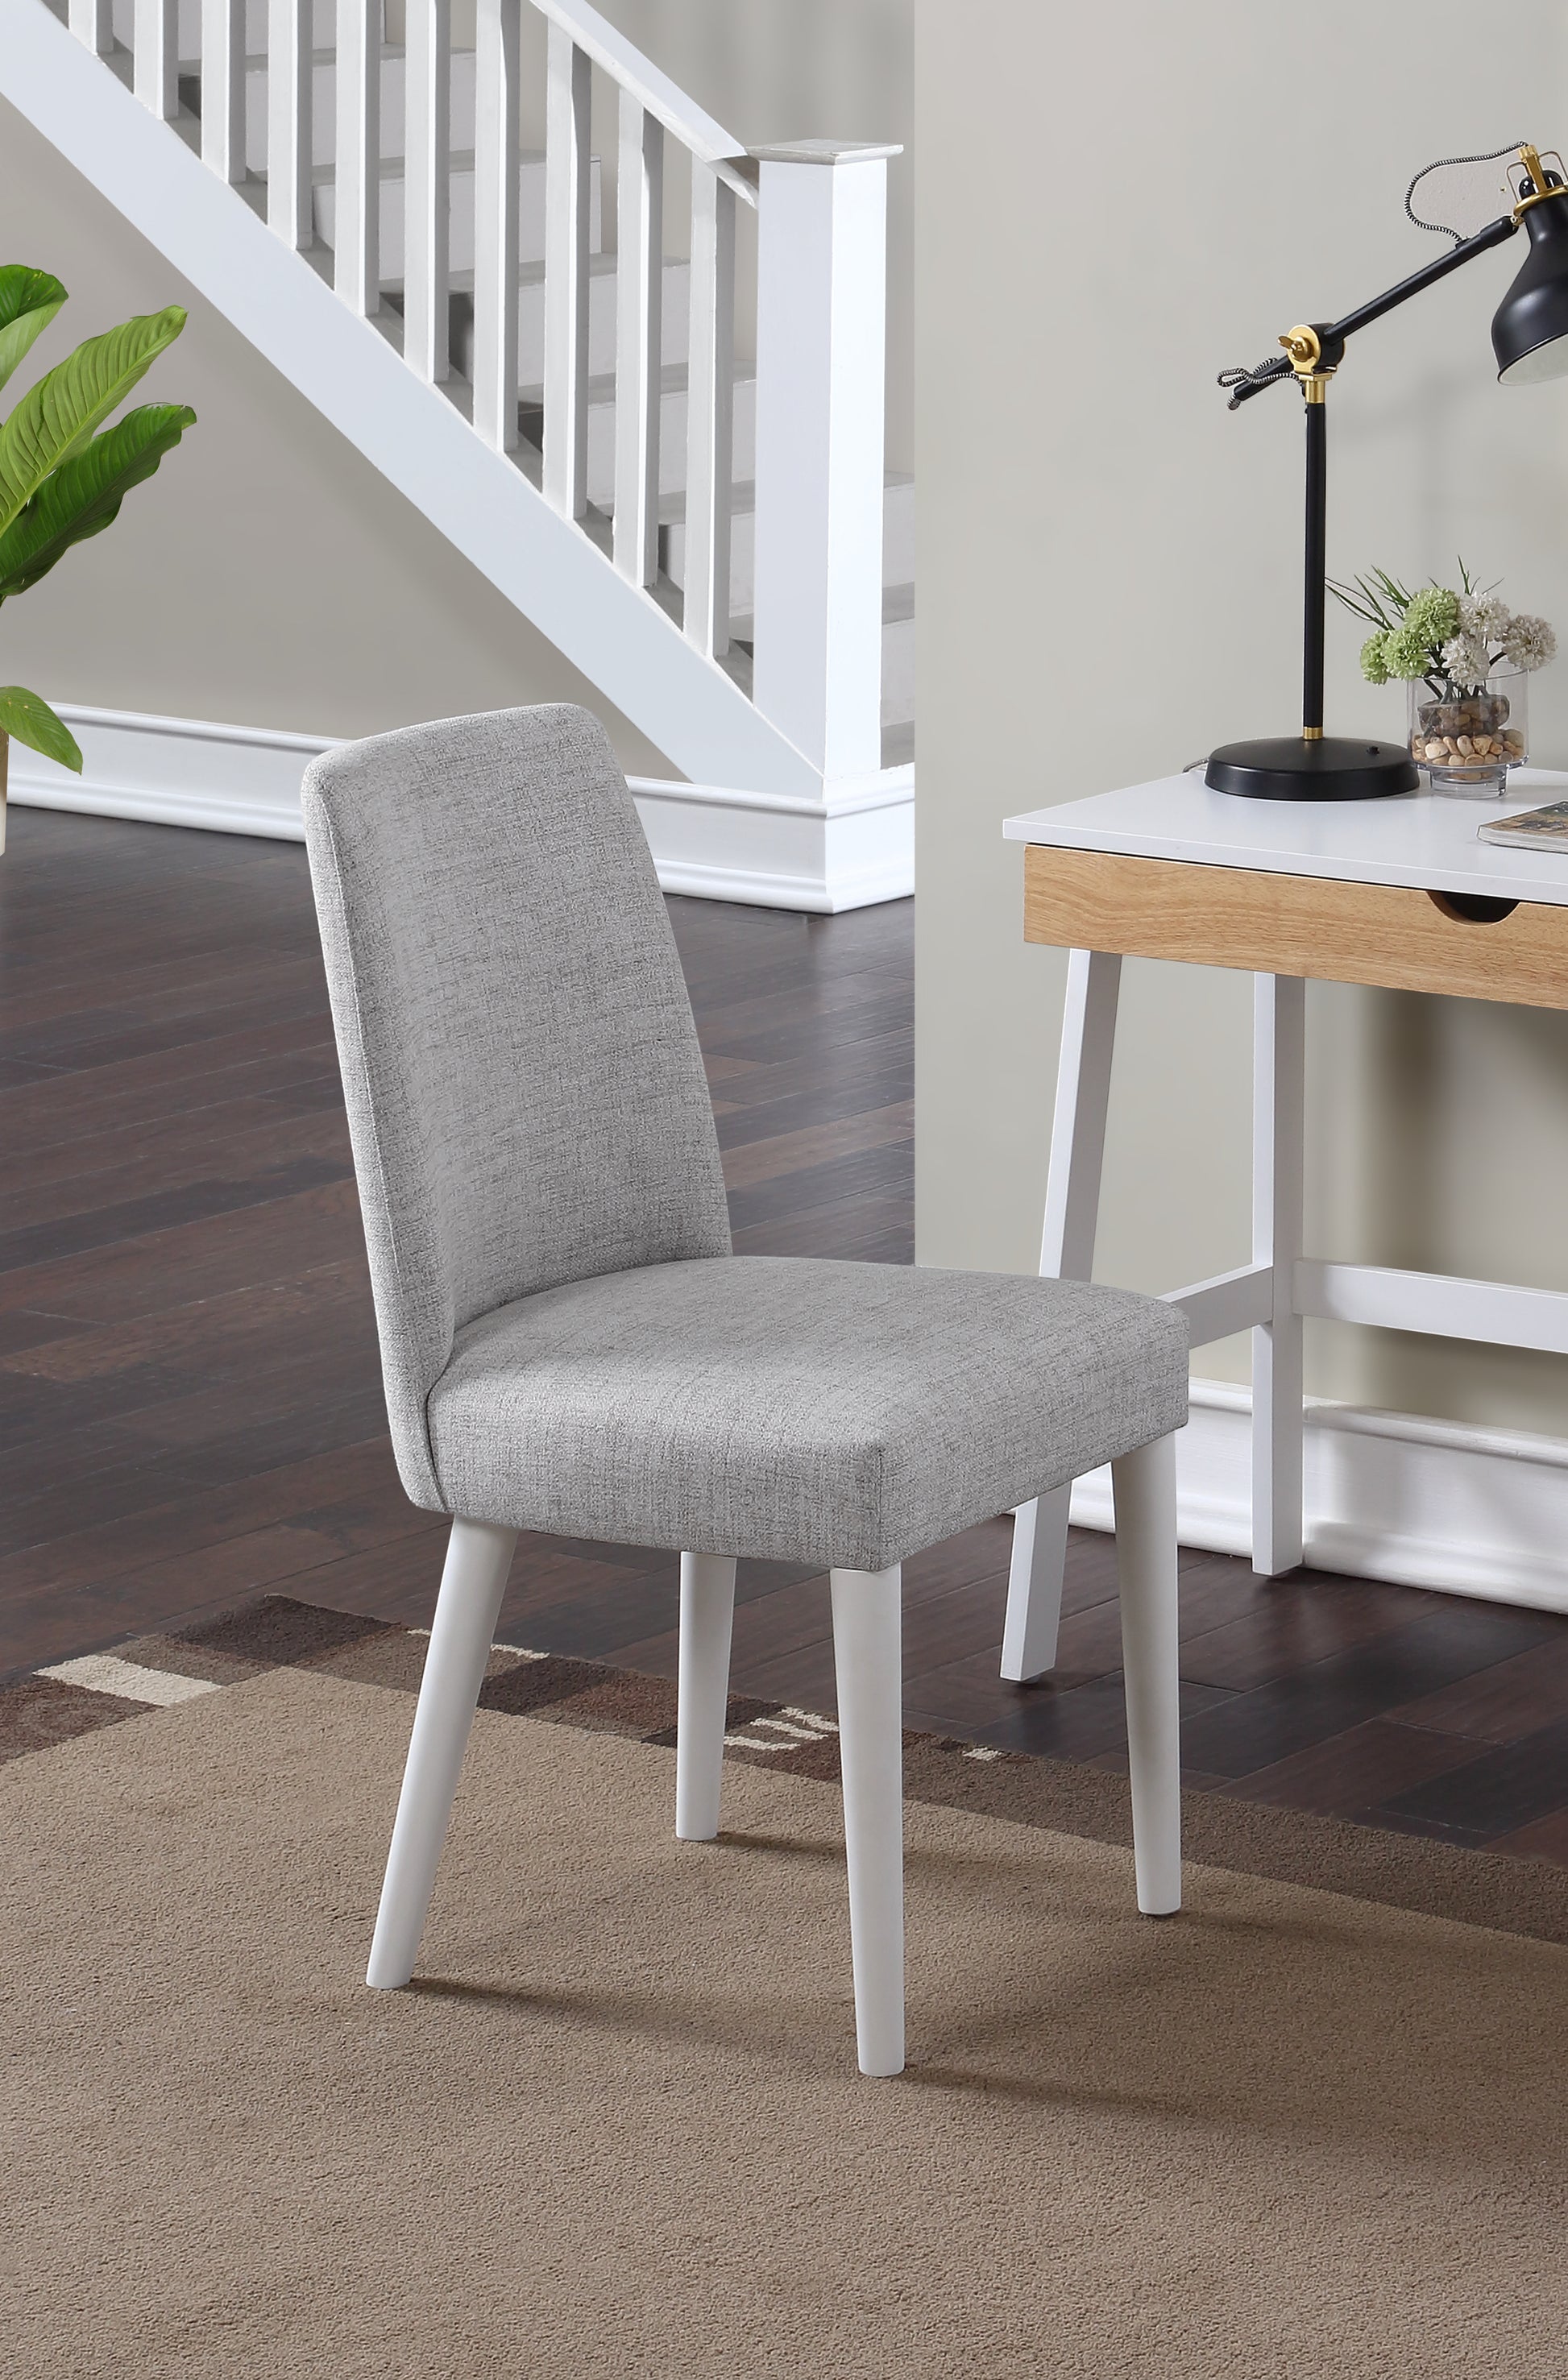 Taylor Chair With White Leg And Gray Fabric